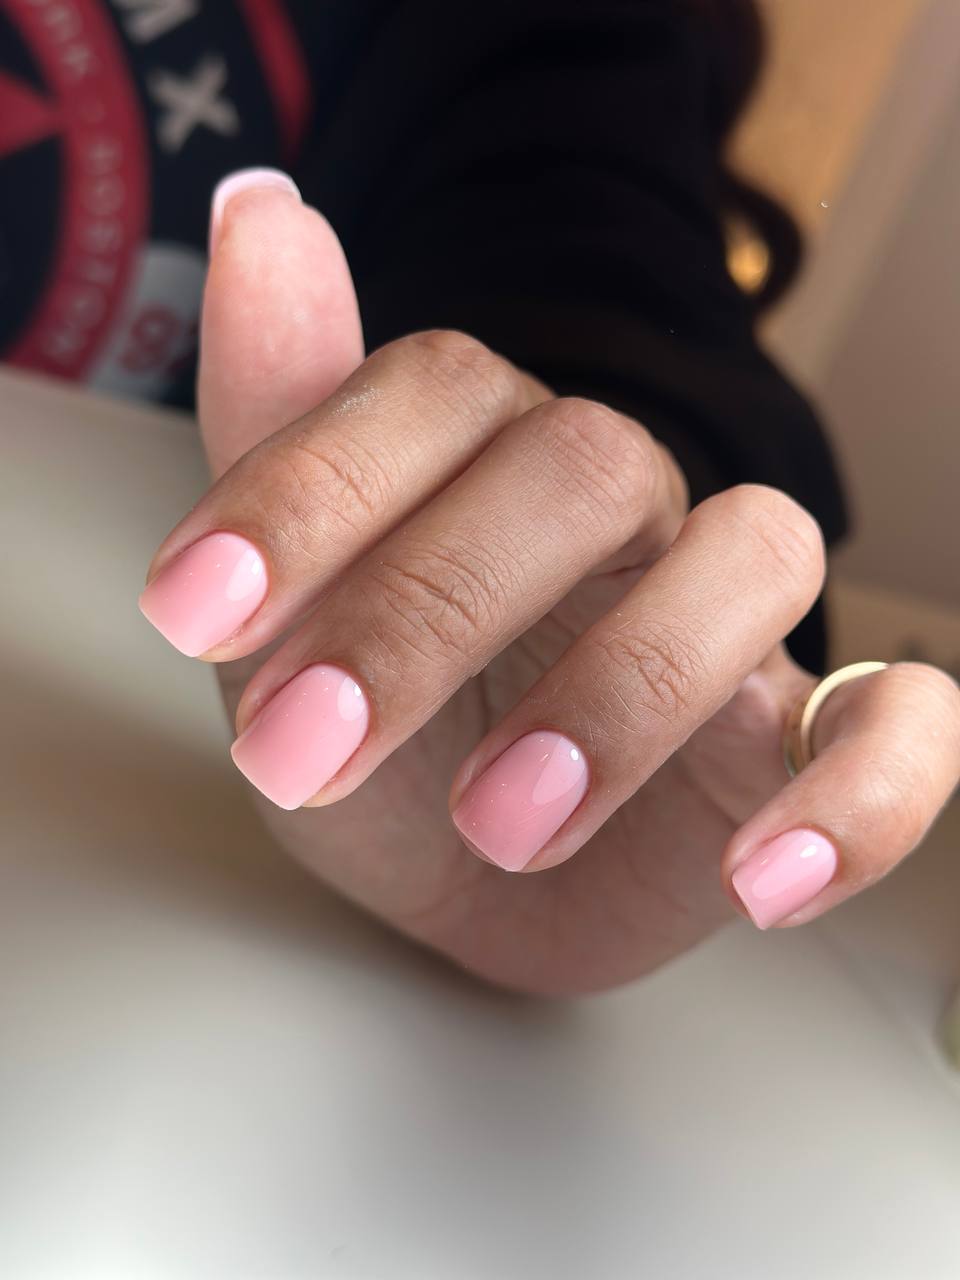 Nude Rubber Base Coat 3 – Pink